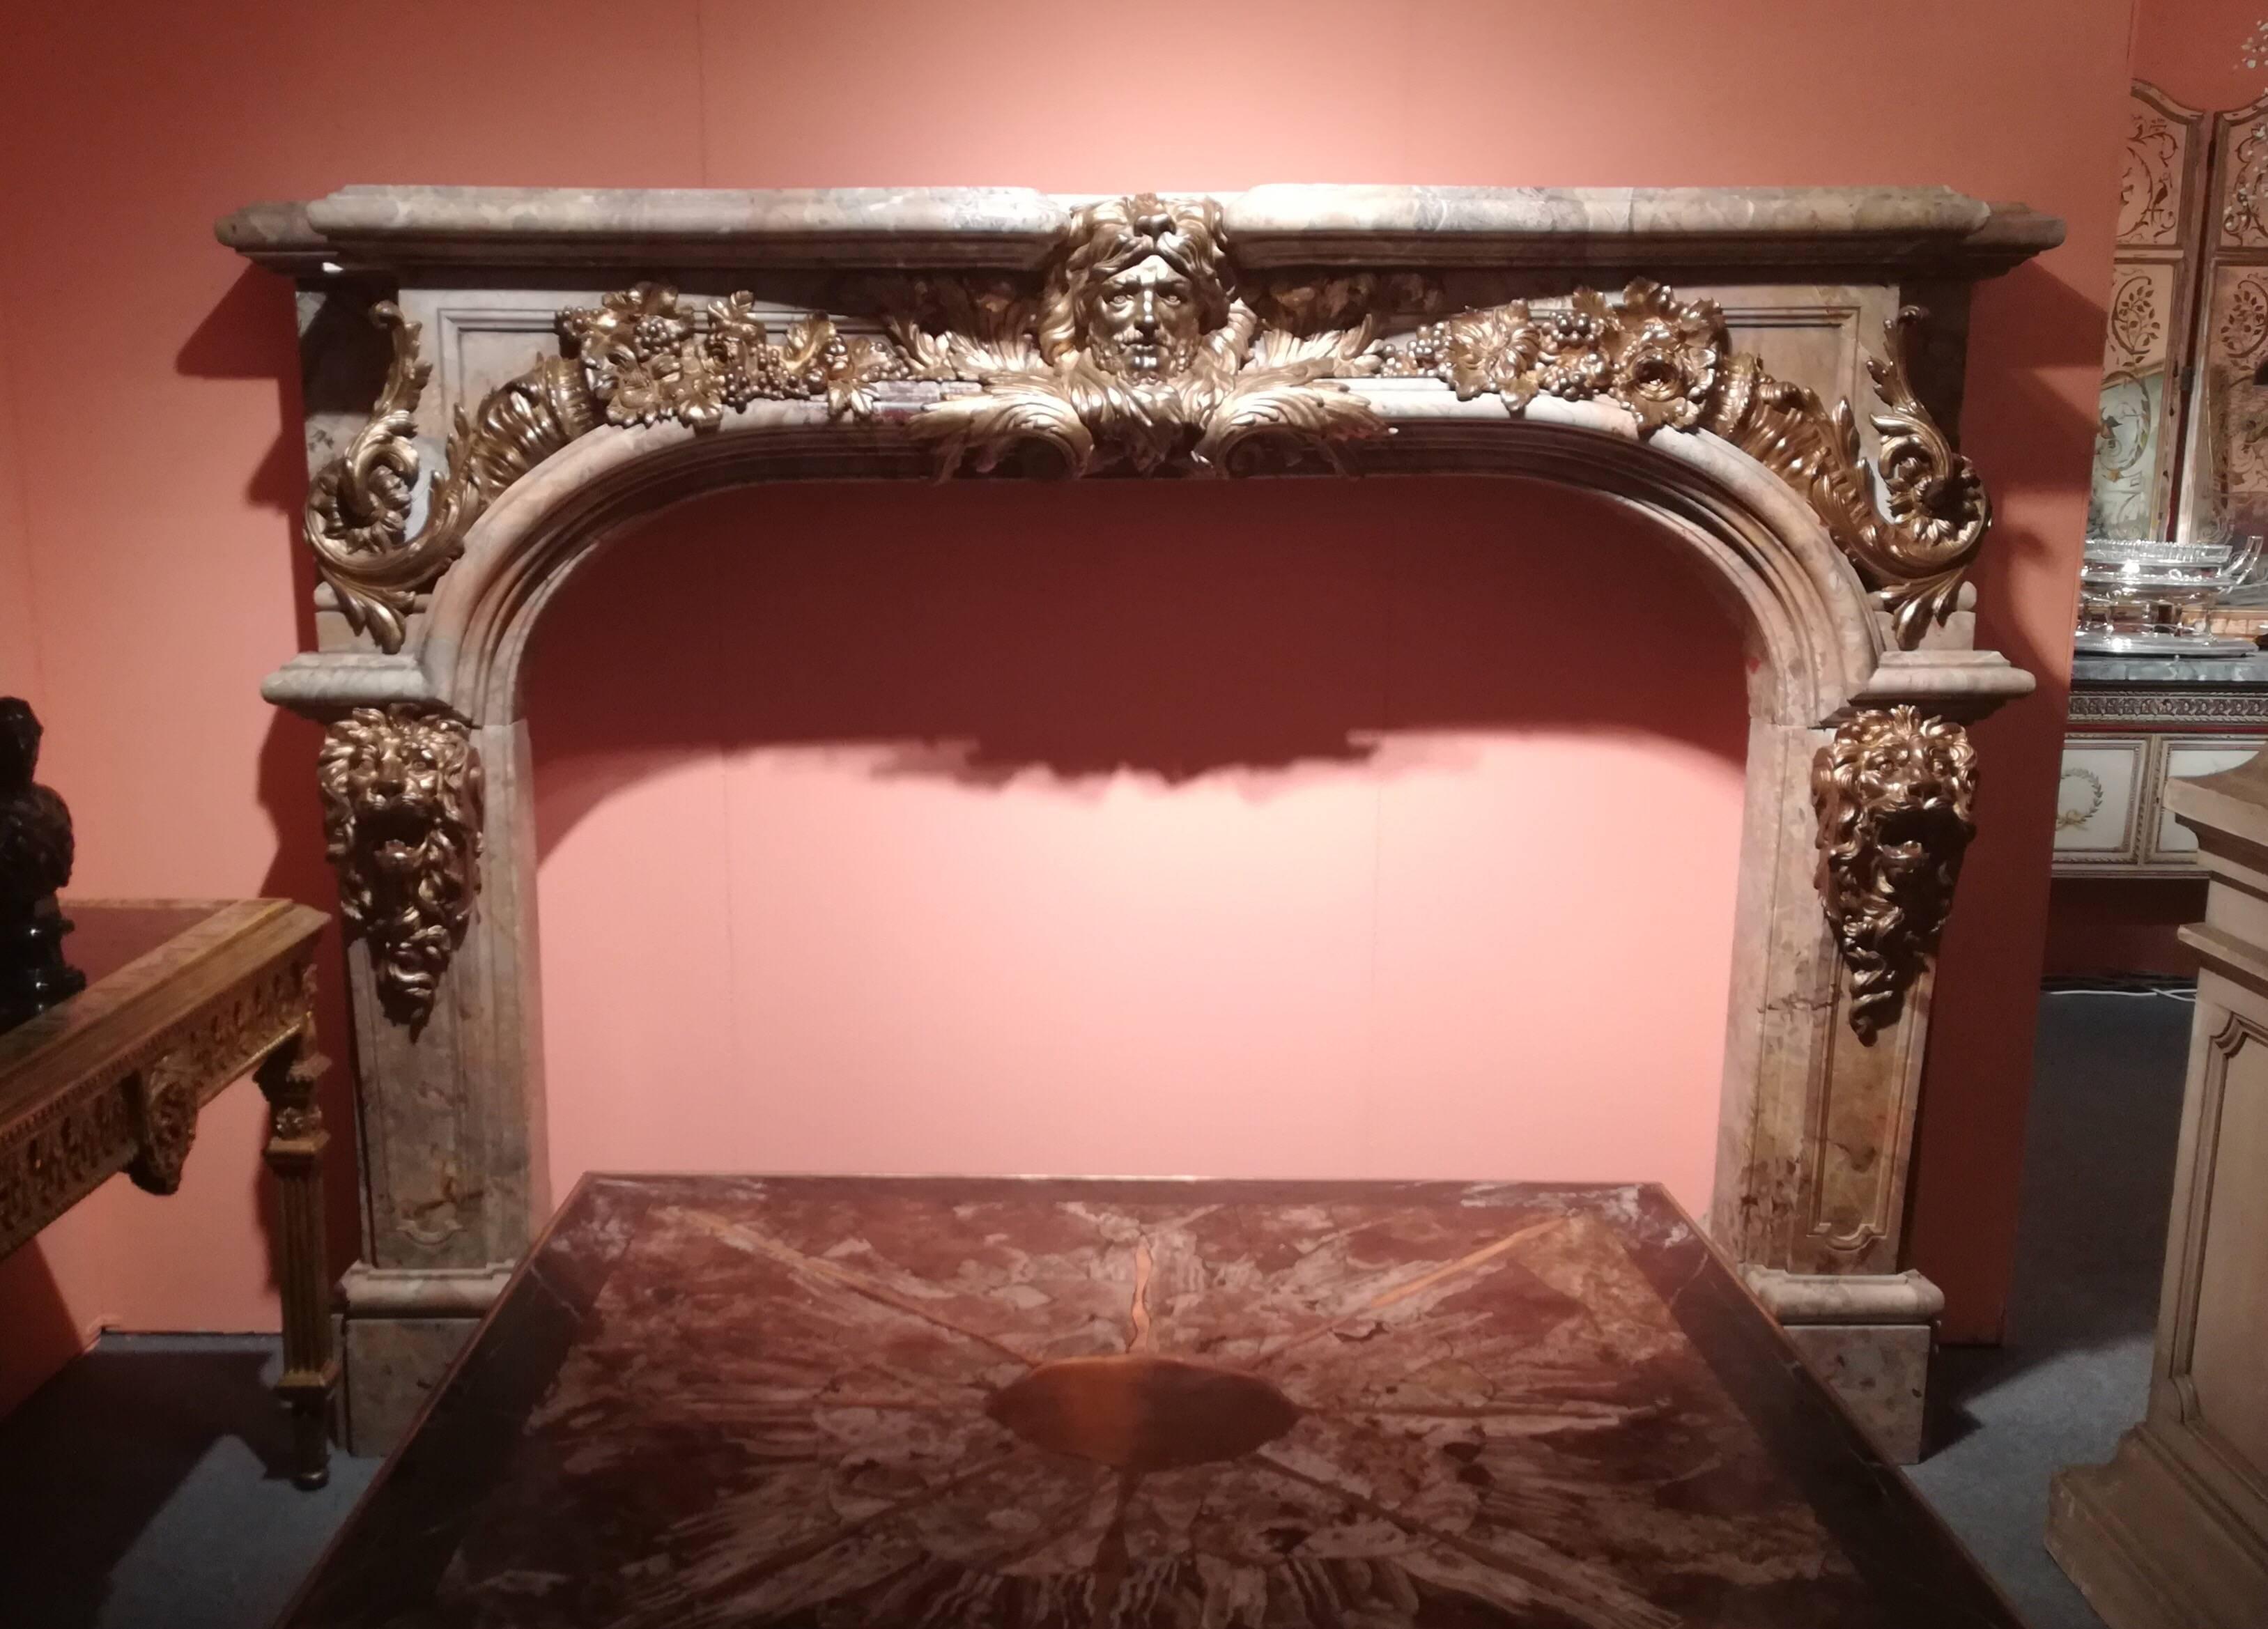 Louis XIV style, 20th century, prestigious and wonderful fireplace made in marble Sarrancolin Fantastico and gilded bronze.
It is adorned with gorgeous gilded bronze ornaments including large heads of lions on the jambs, acanthus leaves and